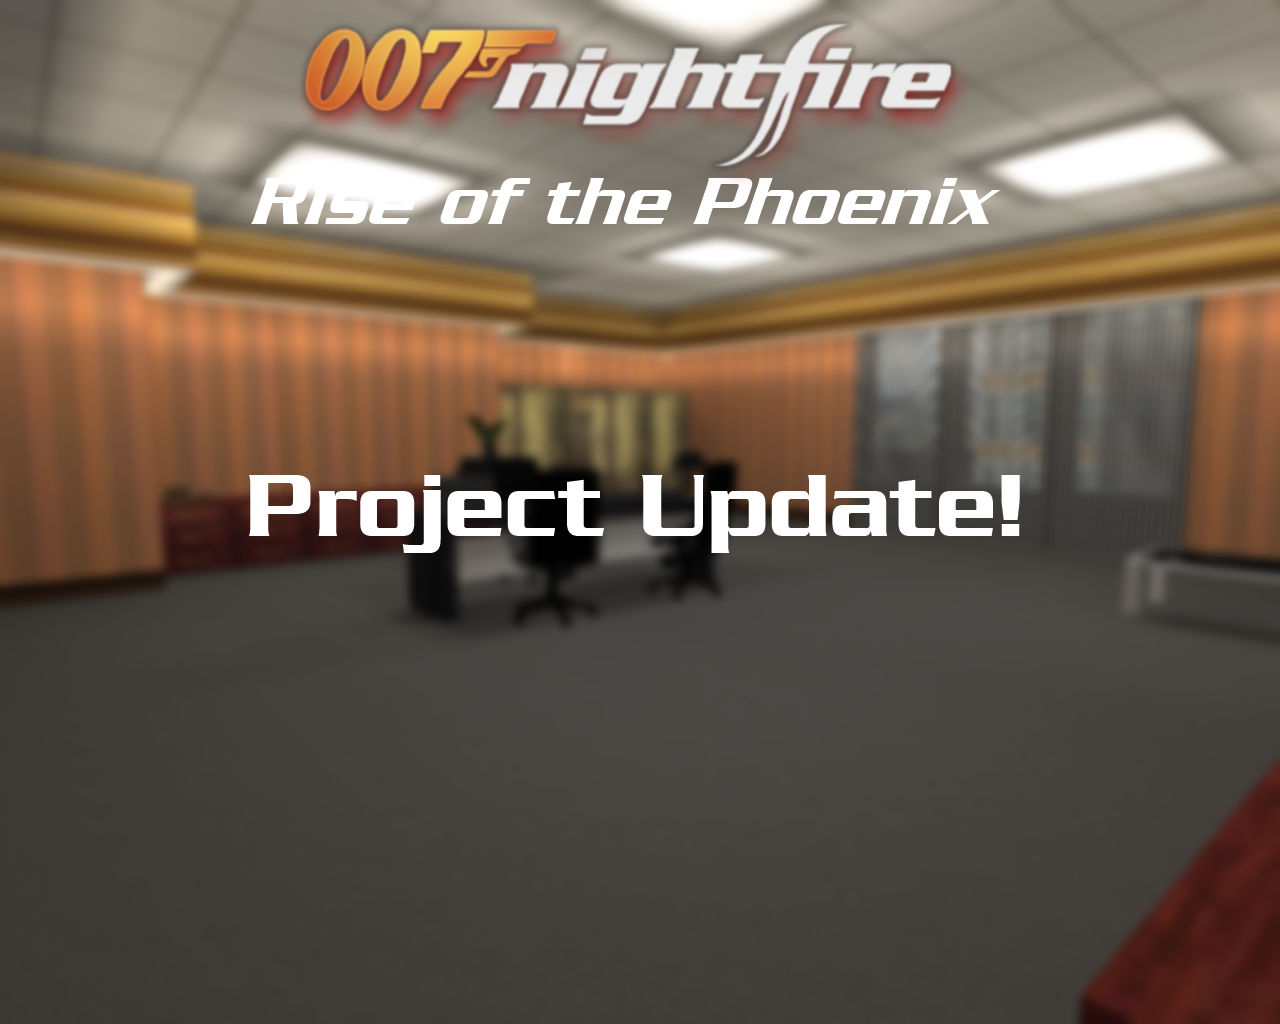 project 007 news